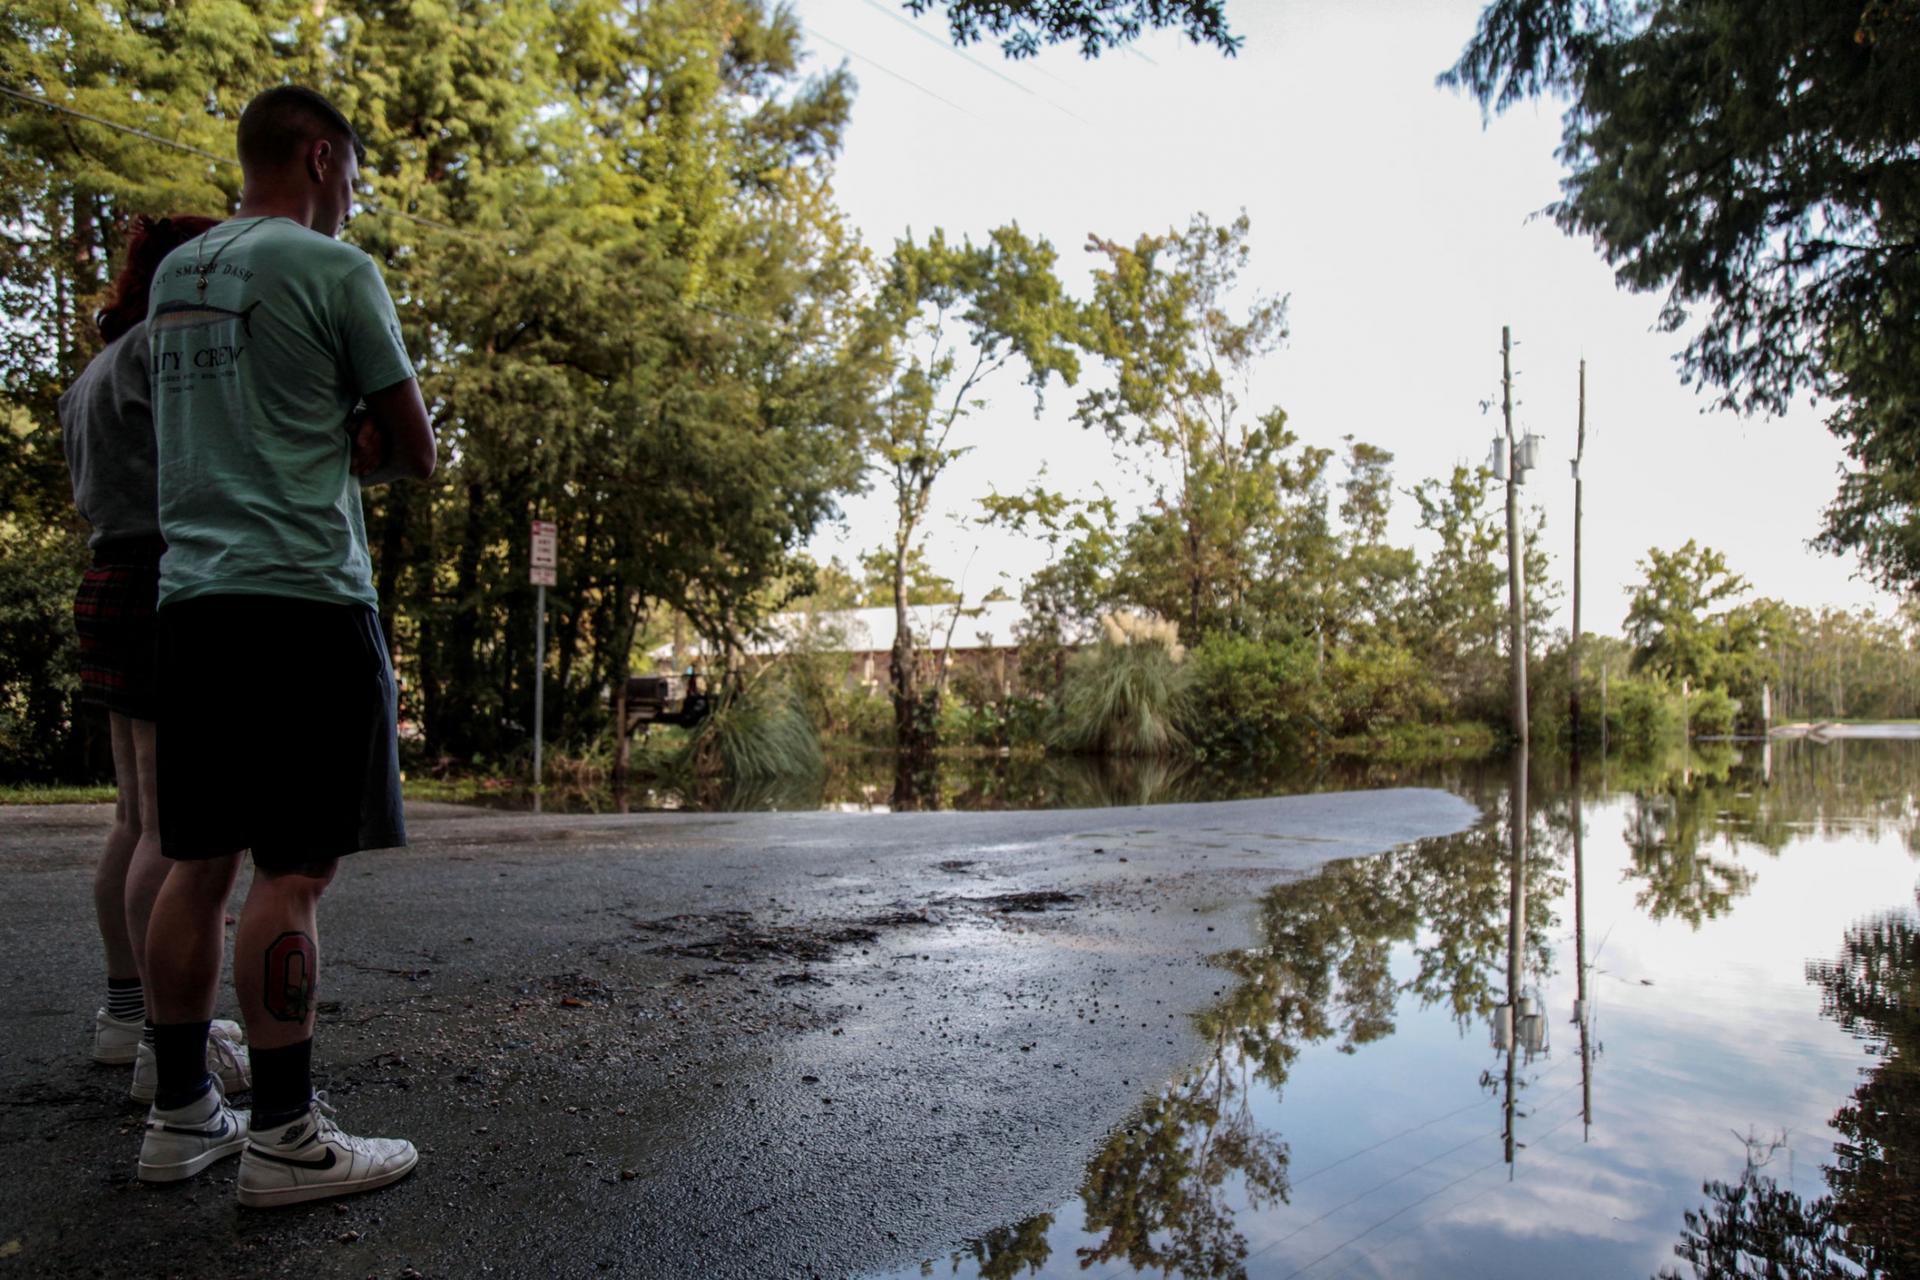 Two people are shown standing on a tree-lined street partially flooded from recent storms.